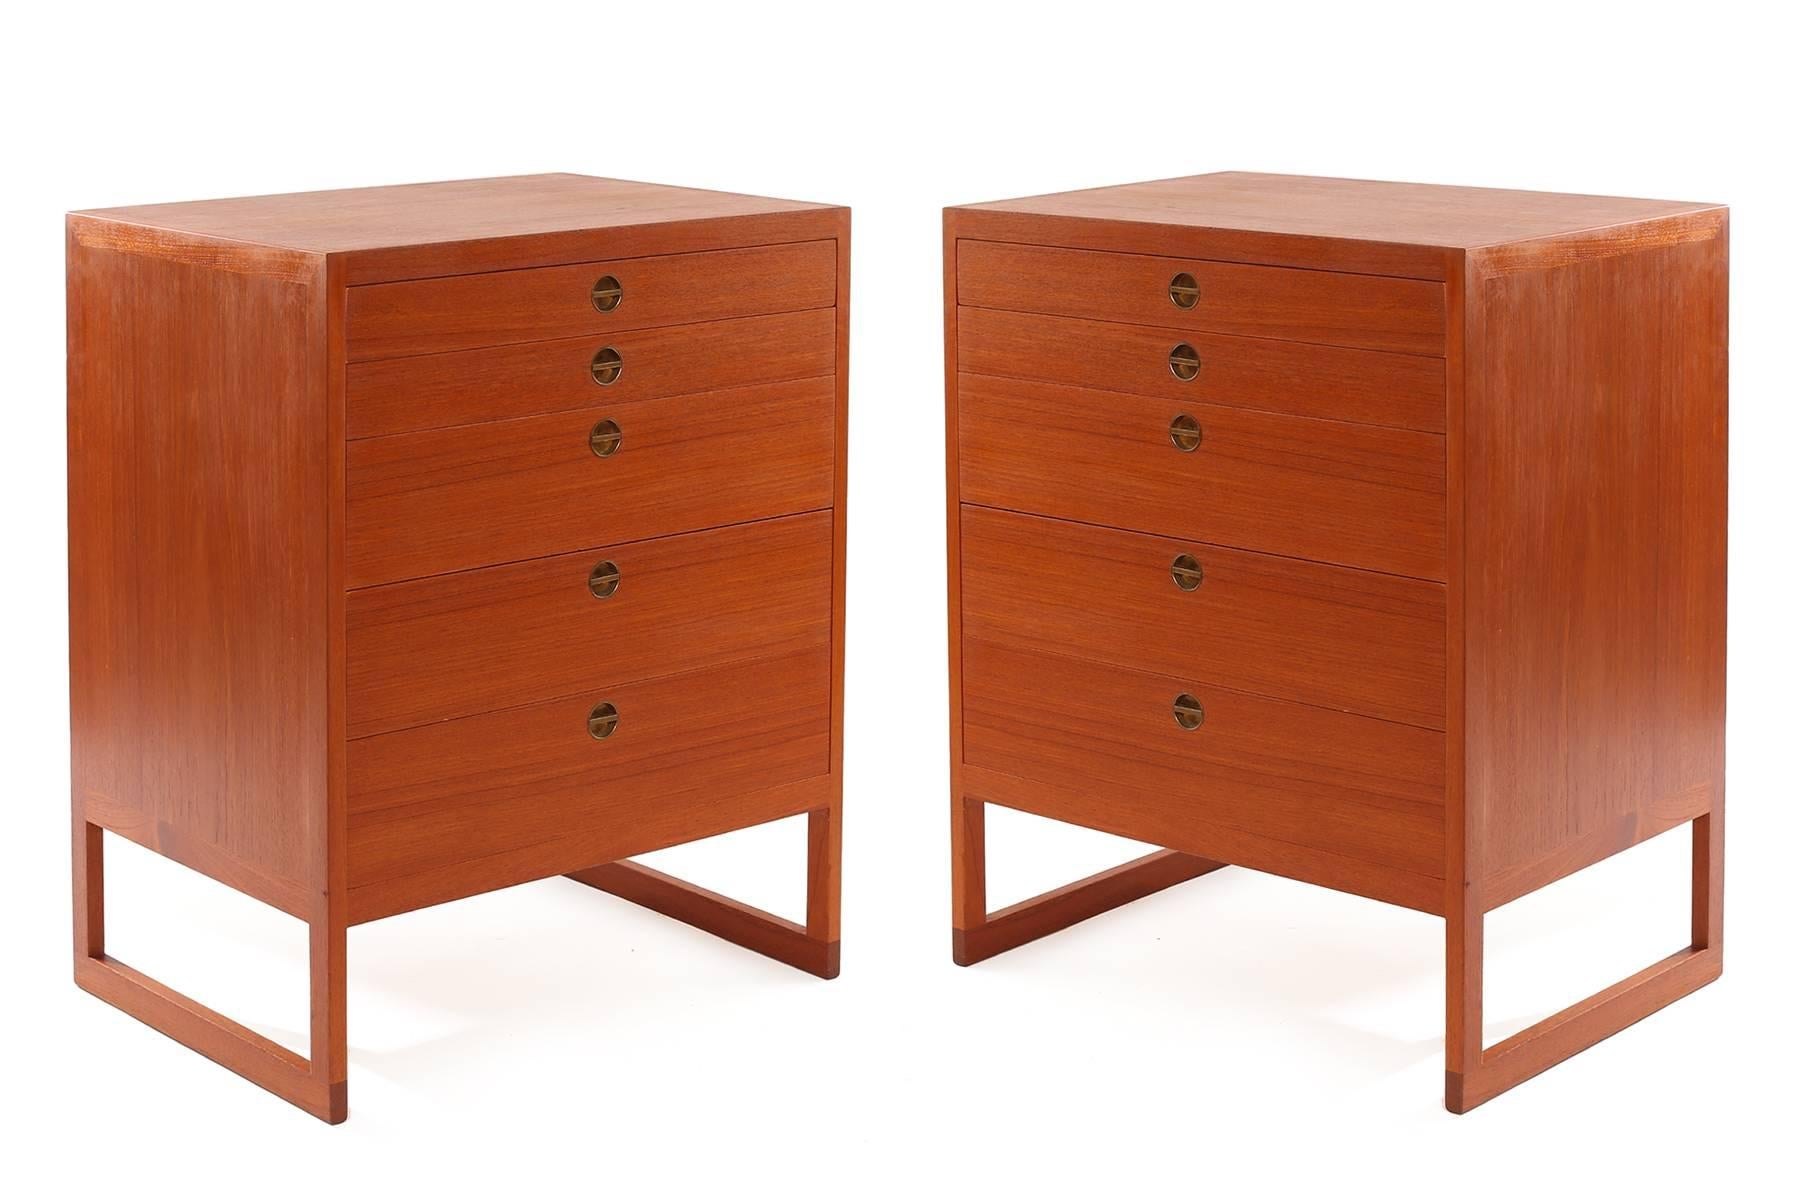 Pair of teak and brass chests by Borge Mogensen circa late 1950s. These all original examples are solid teak with inset patinated brass handles and five drawers each. Perfect as large-scale night stands or as smaller scale dressers. Price listed is